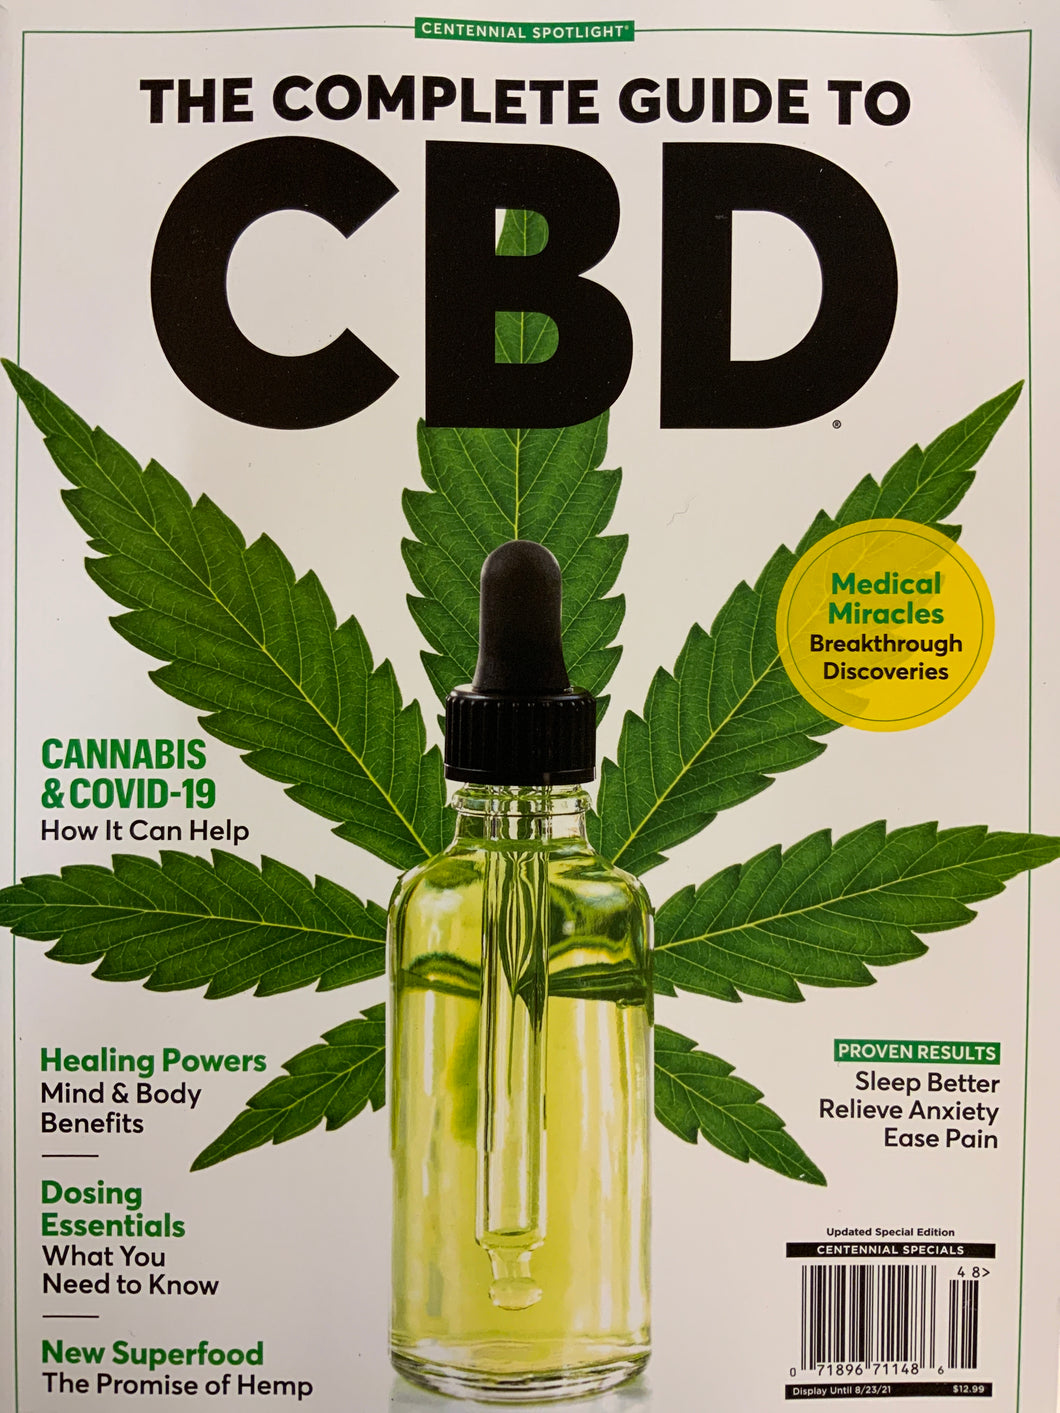 The Complete Guide To CBD